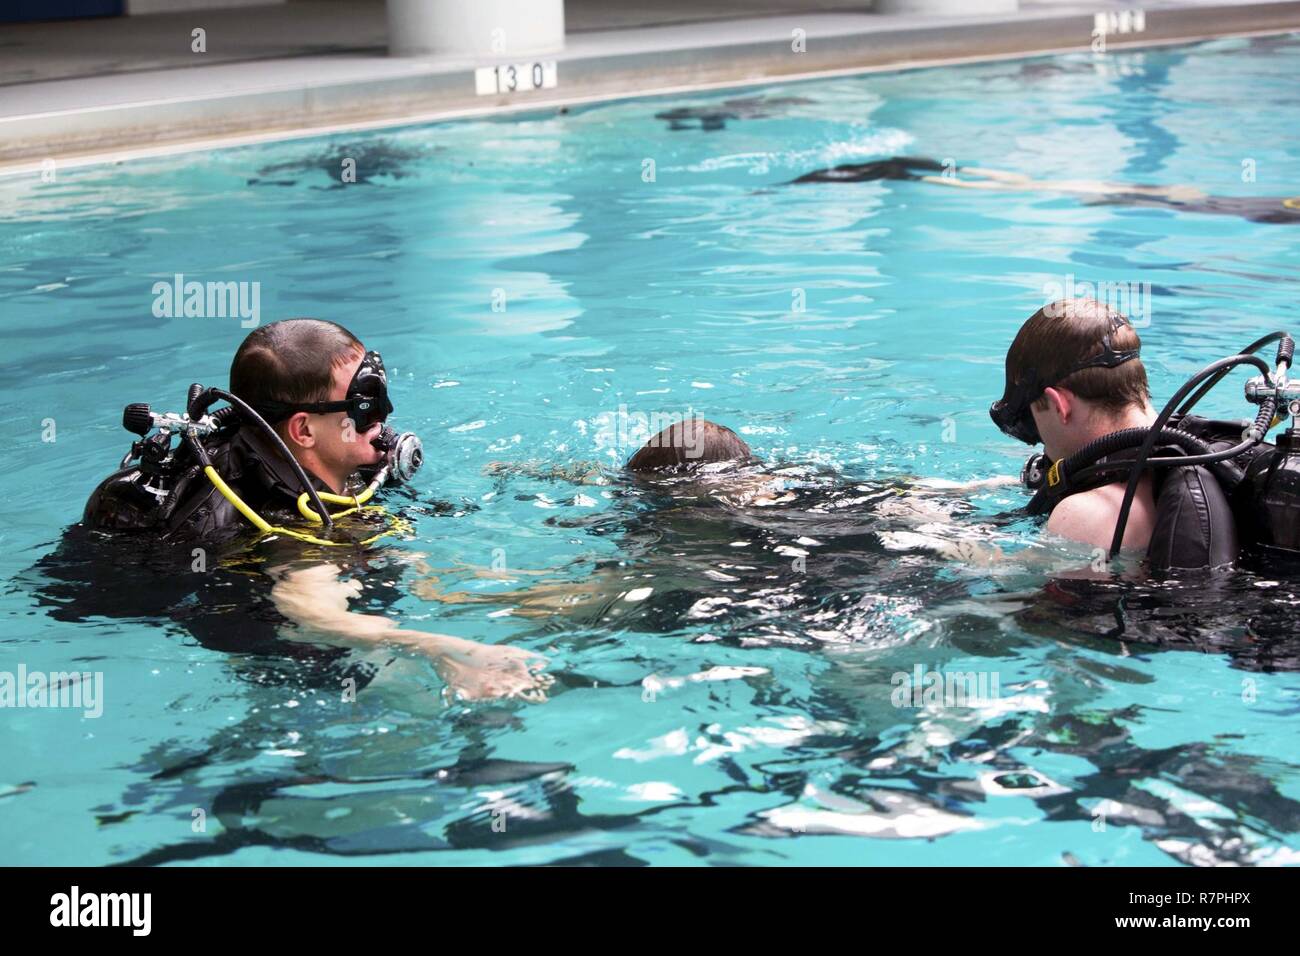 Marines conduct dive training in small groups to ensure safety in the pool during a battalion training event at Camp Lejeune, N.C., March 23, 2017. The Marines conducted training with the self-contained underwater breathing apparatus to maintain proficiency and confidence in their combat diving skills. The Marines are with 2nd Reconnaissance Battalion, 2nd Marine Division. Stock Photo